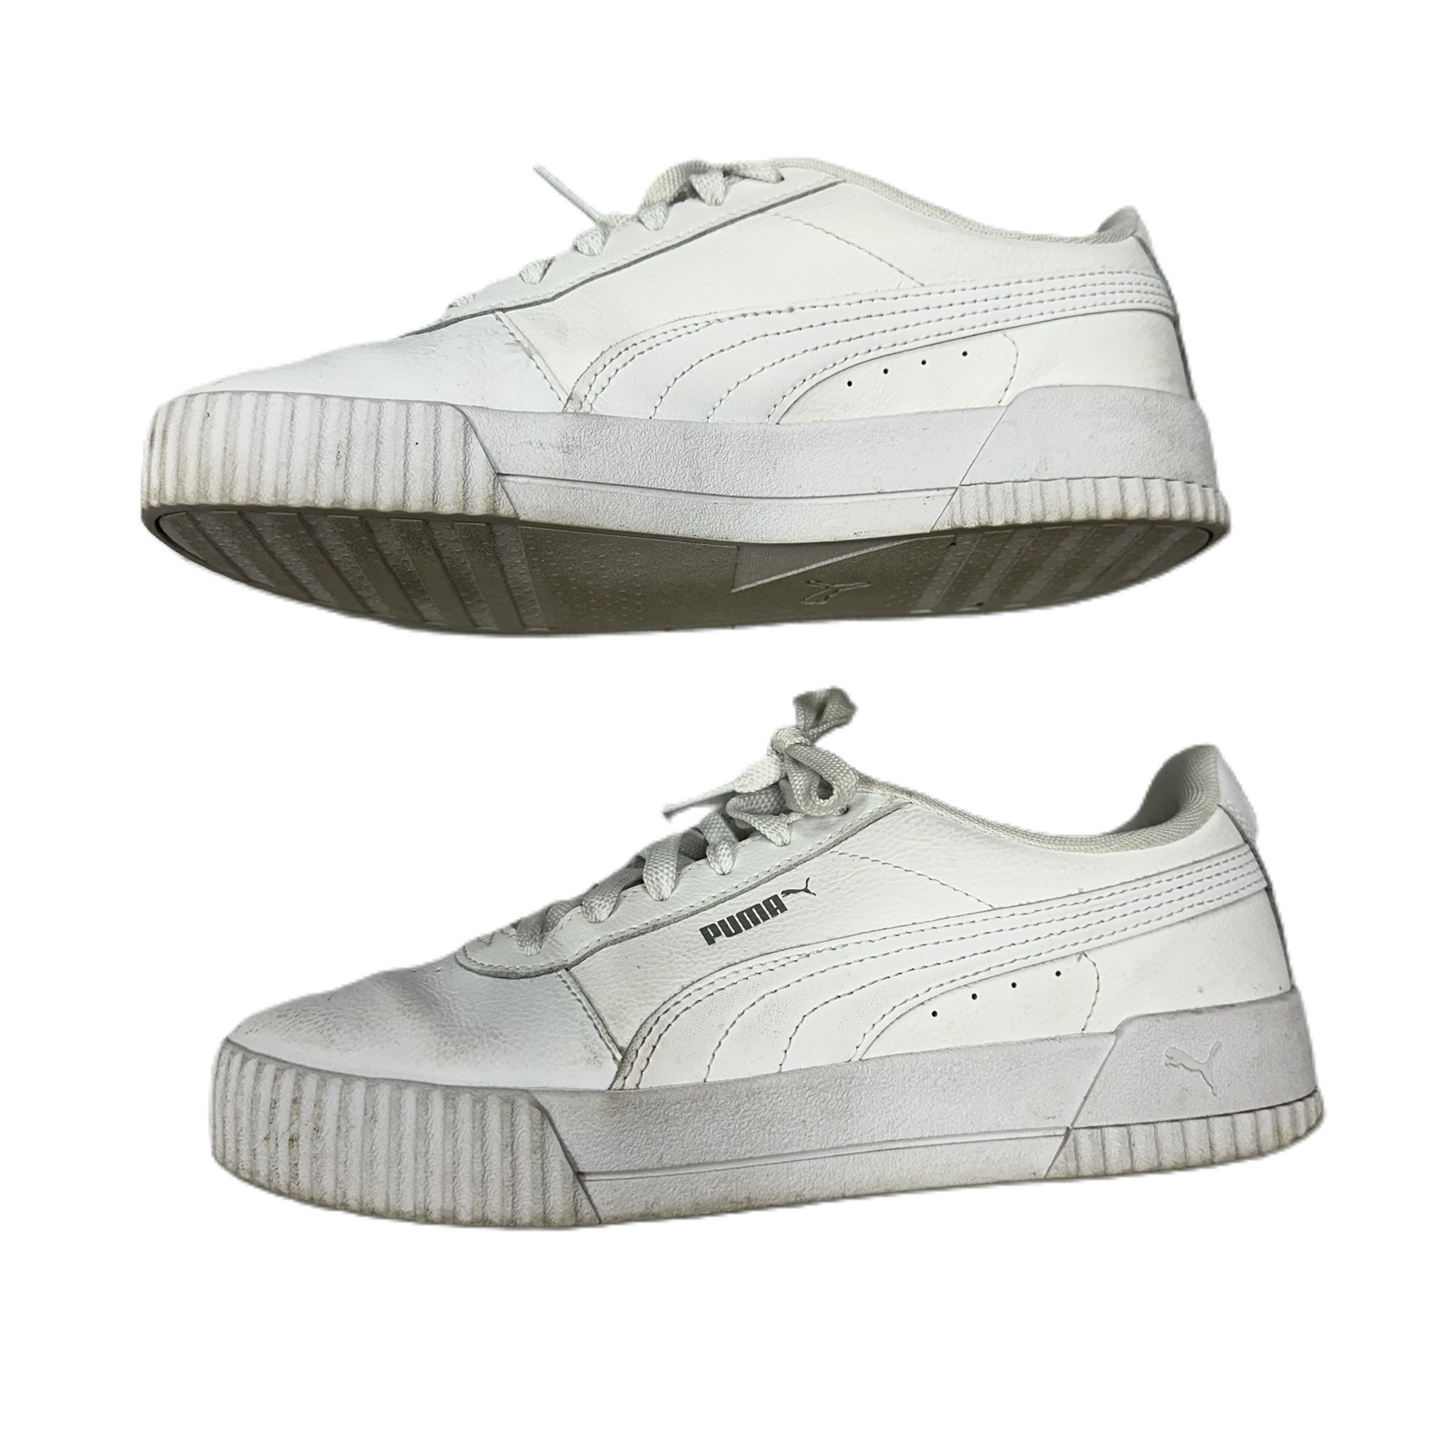 Shoes Sneakers By Puma  Size: 9.5